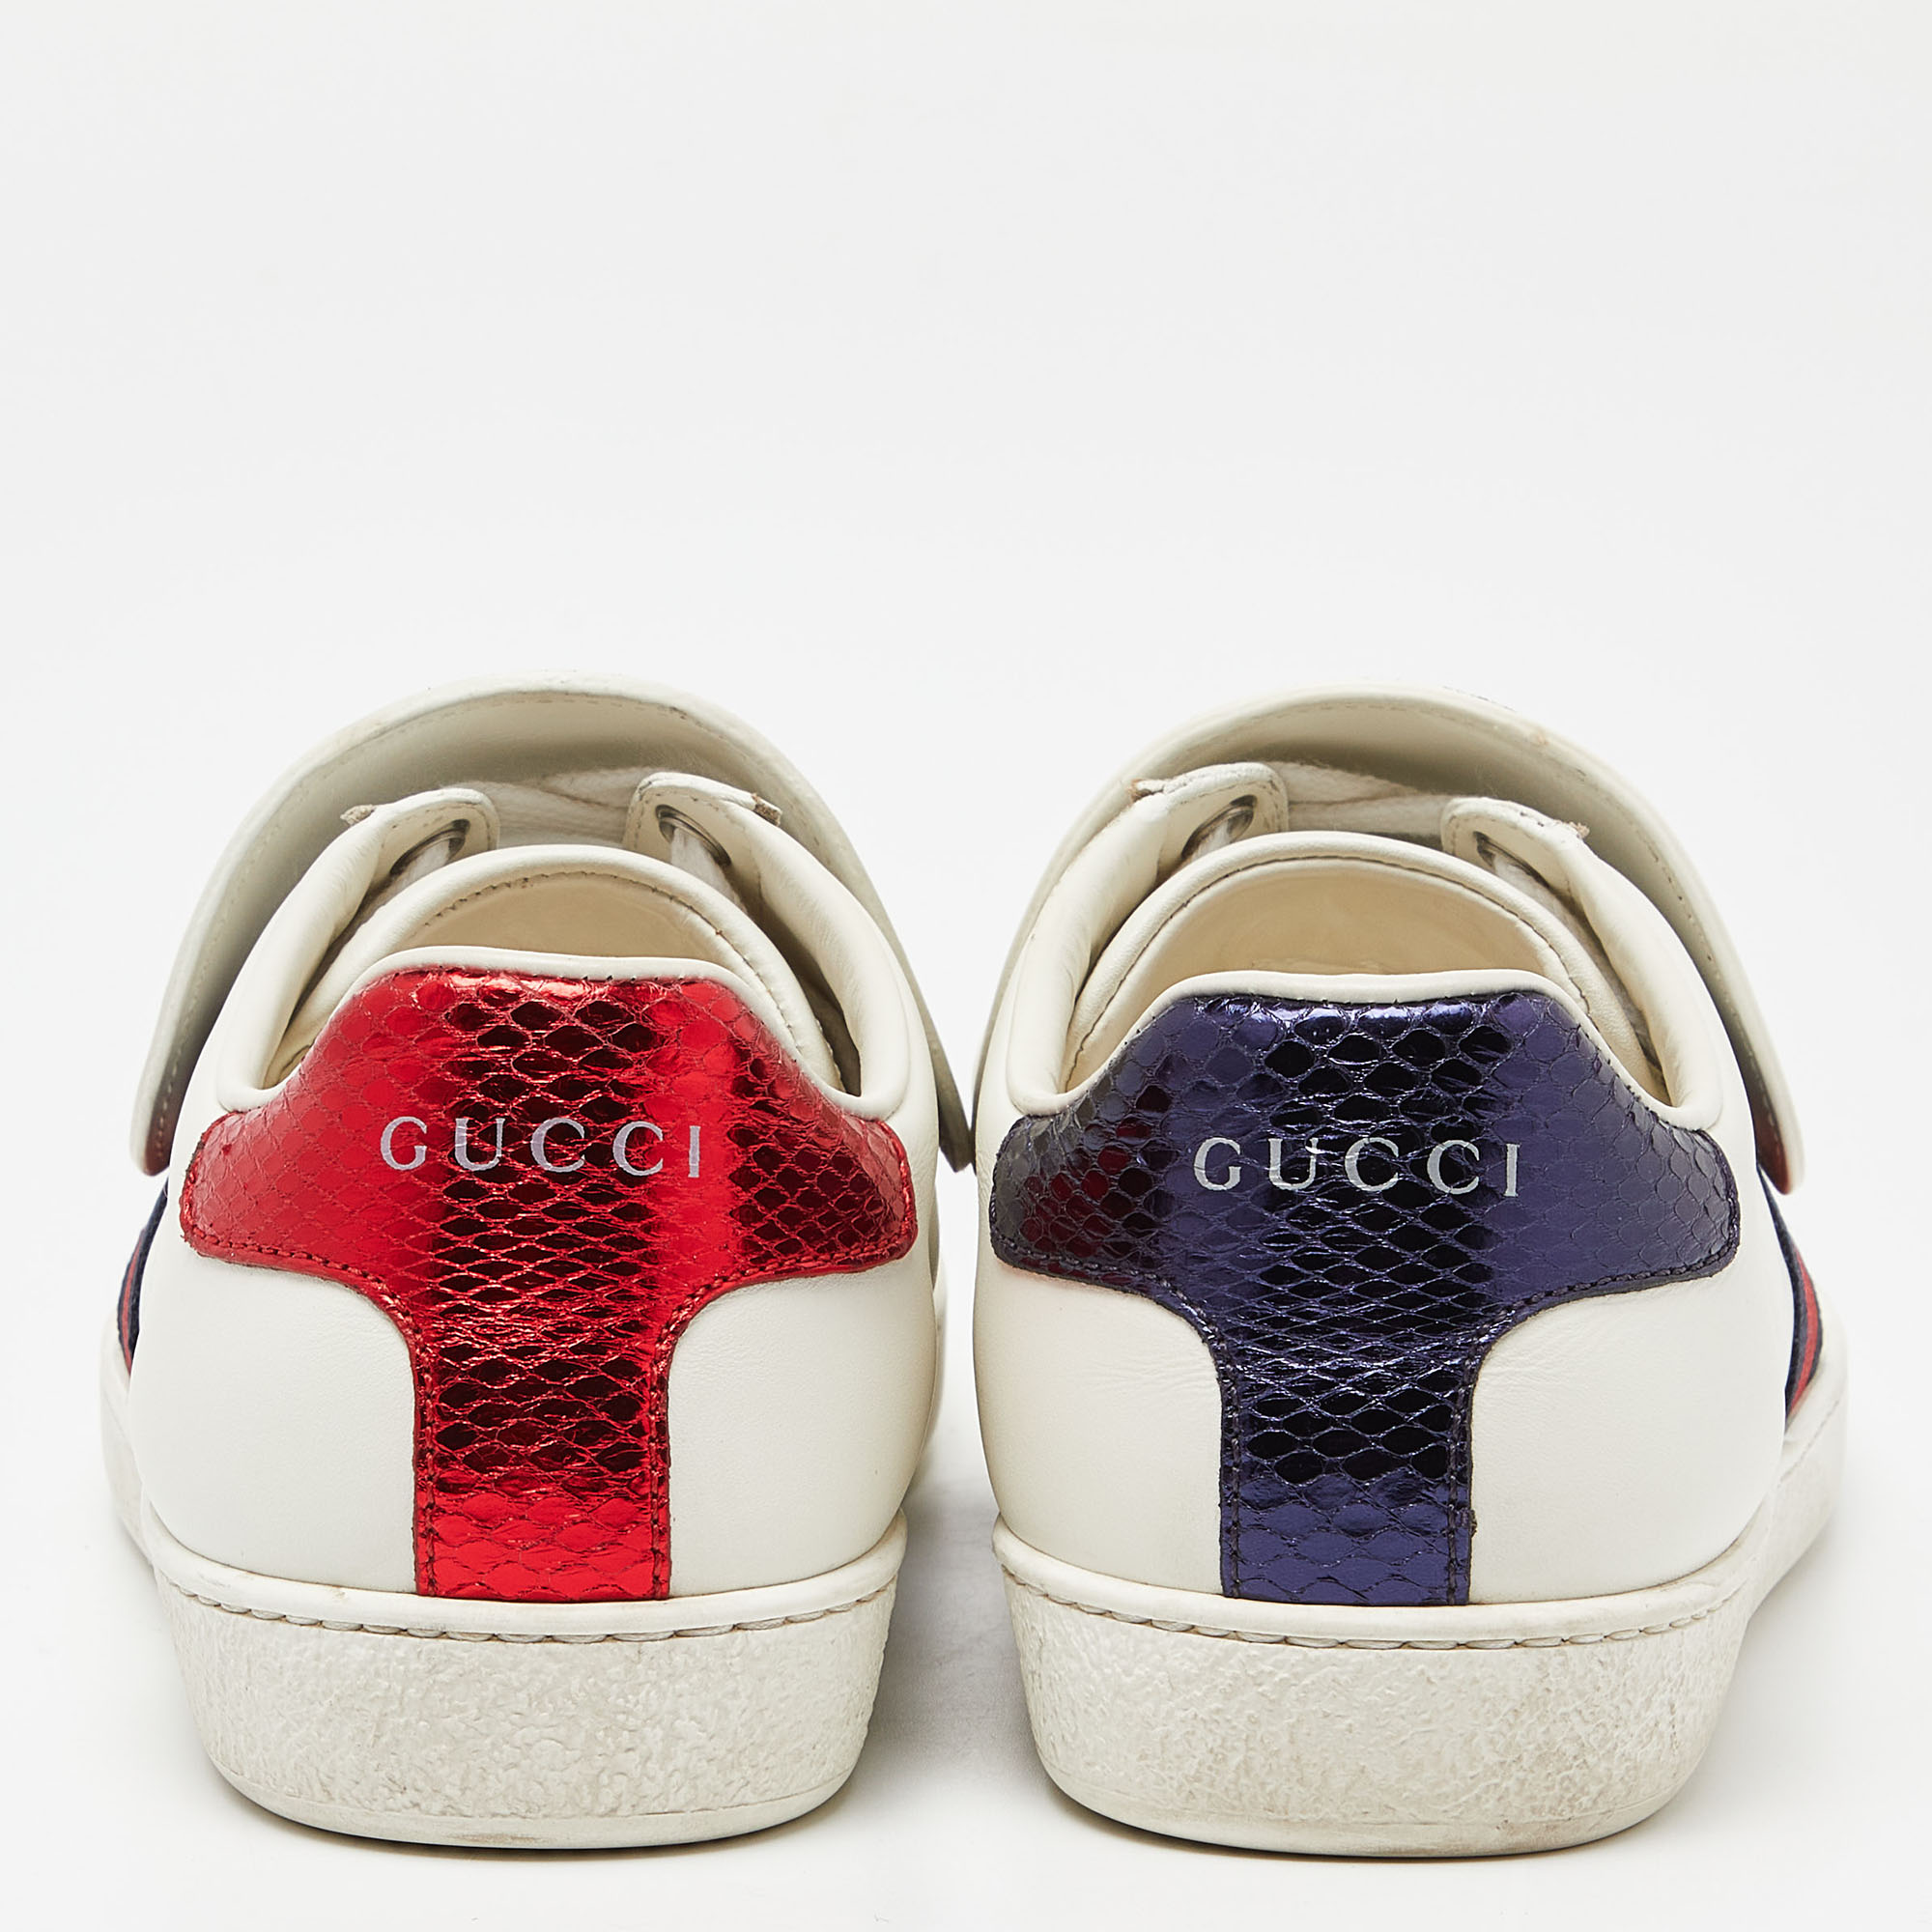 Gucci White Leather Embellished Pineapple Strap Ace Sneakers Size 35